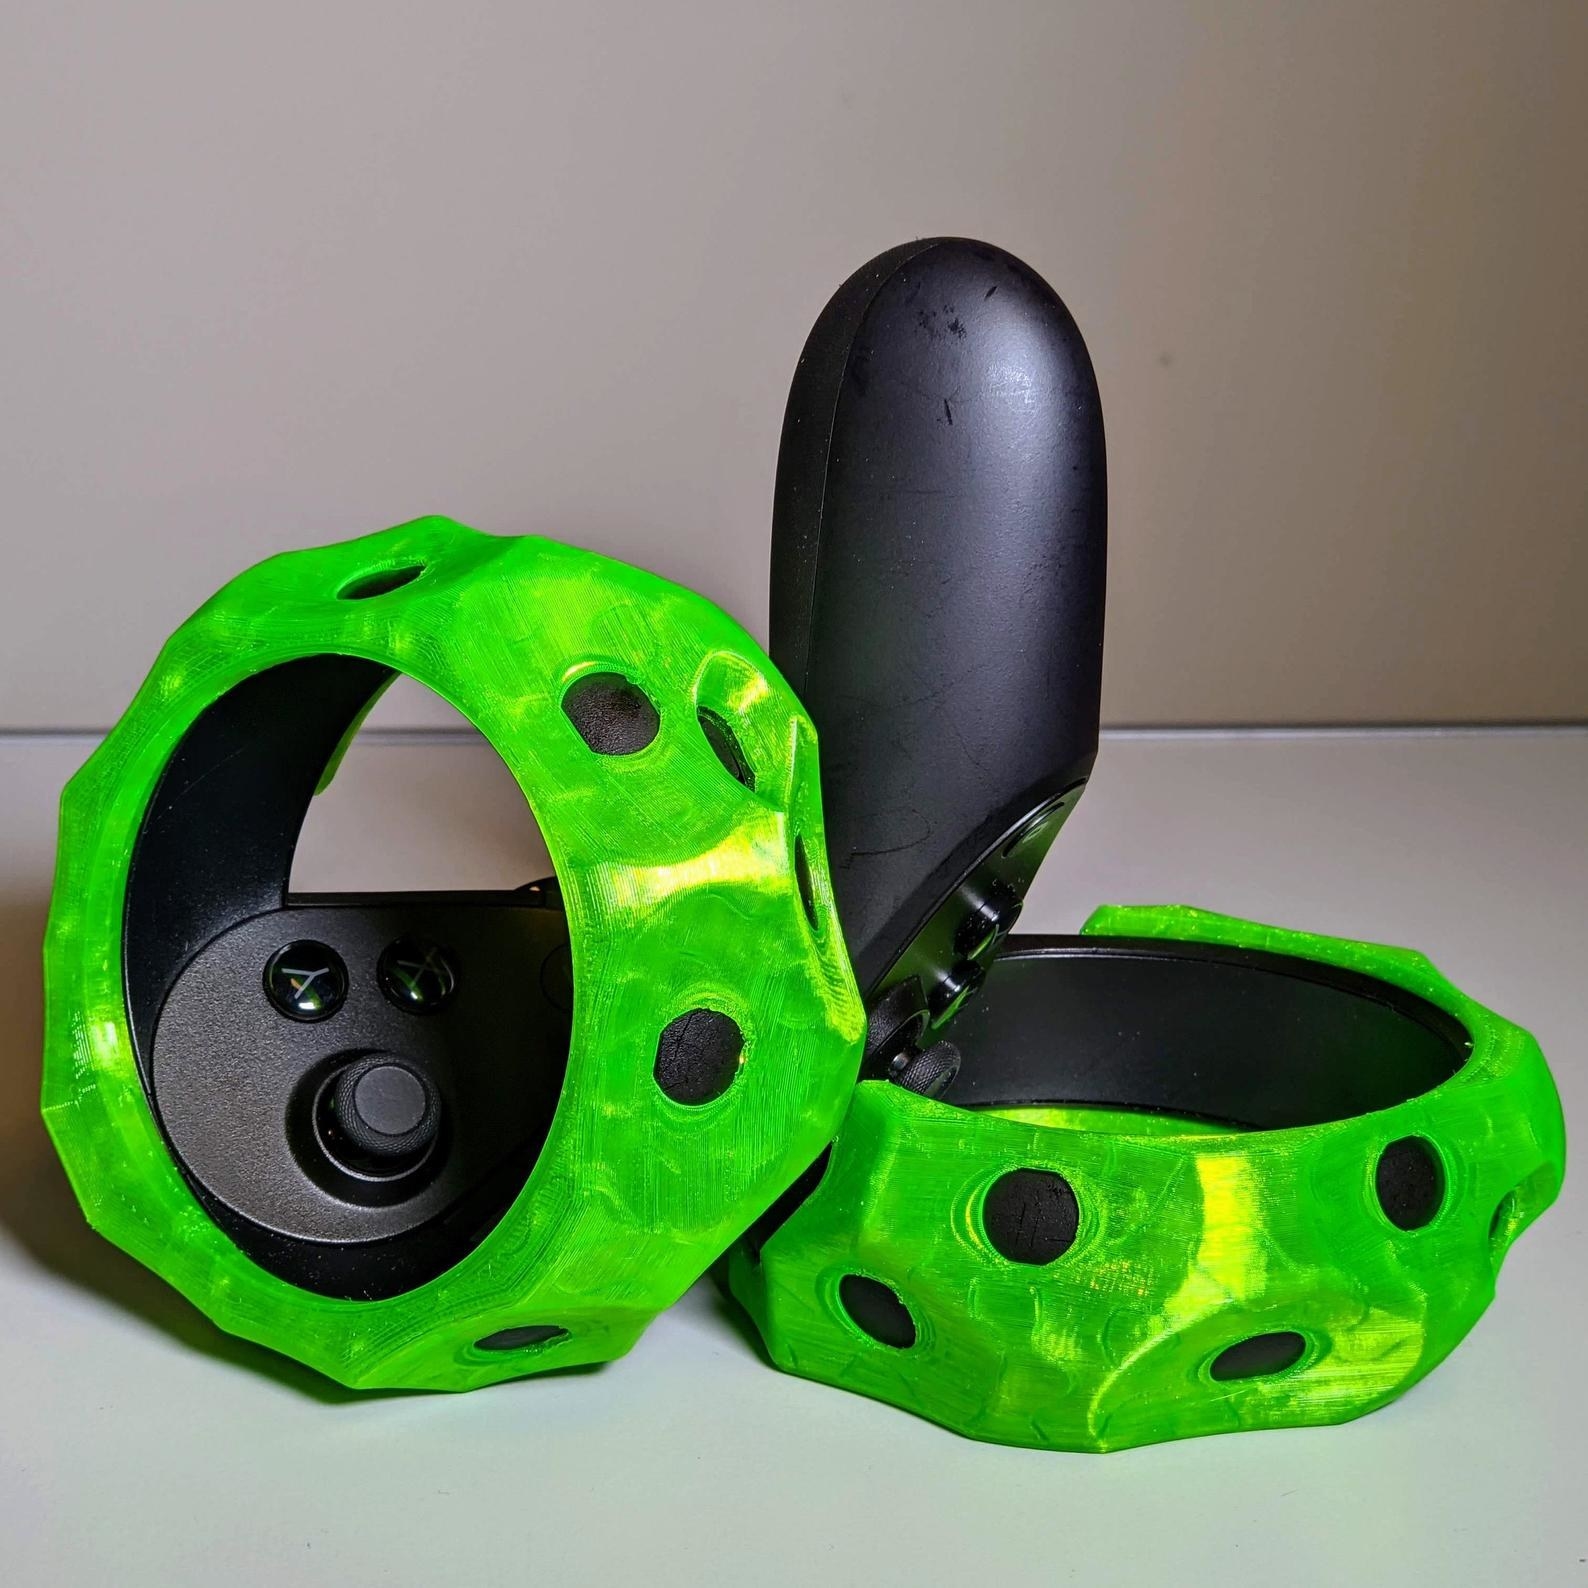 The lime green controllers